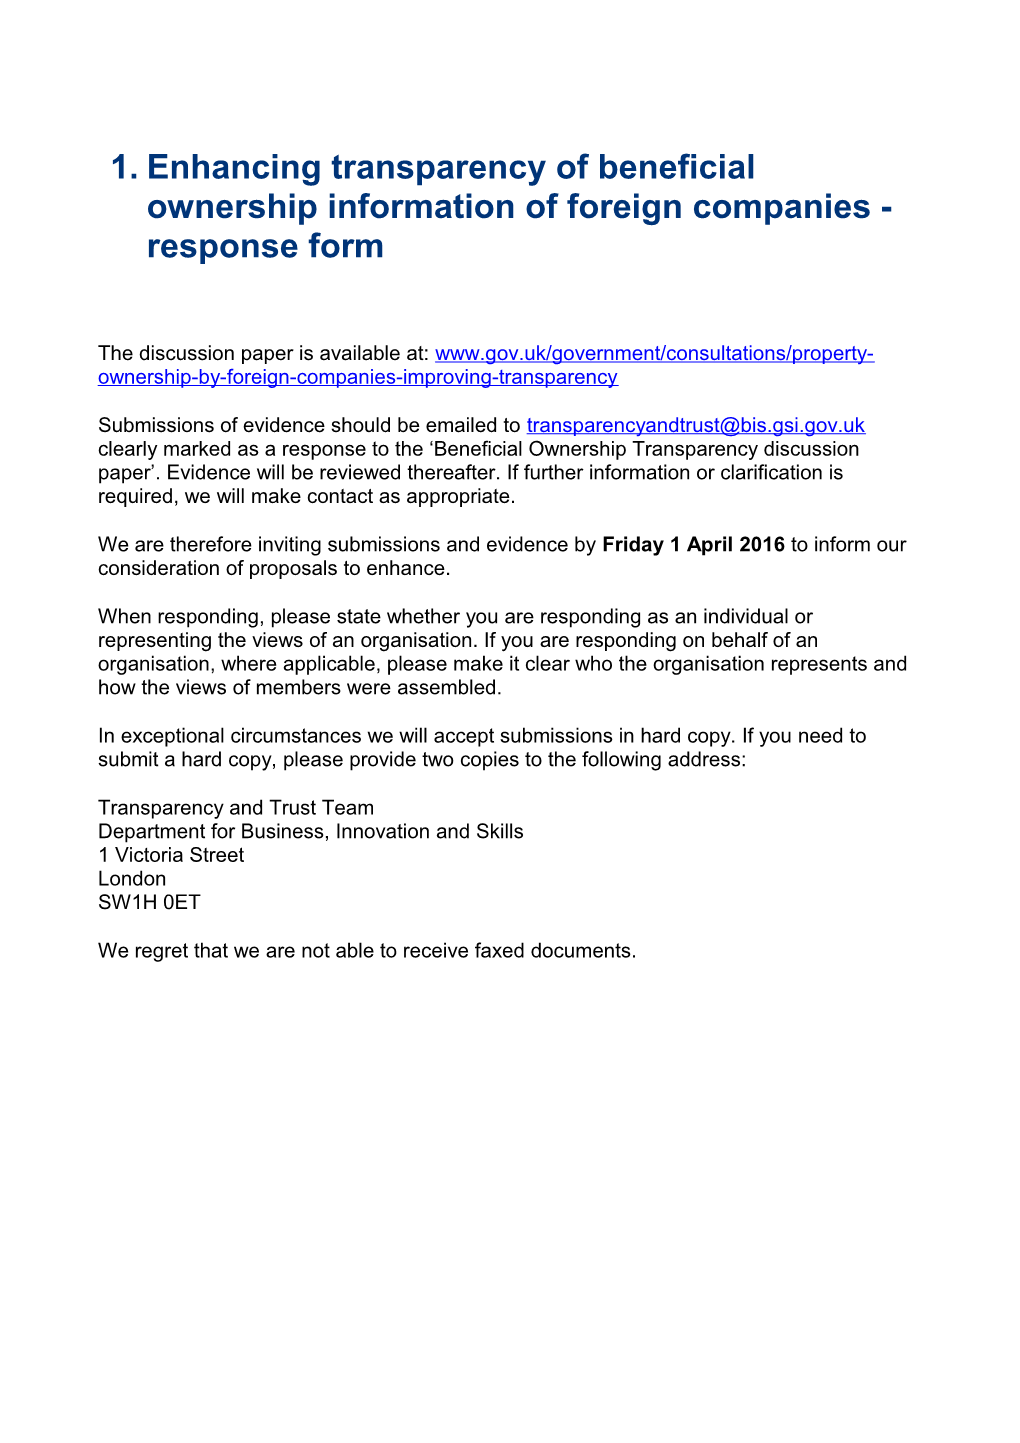 Enhancing Transparency of Beneficial Ownership Information of Foreign Companies - Response Form